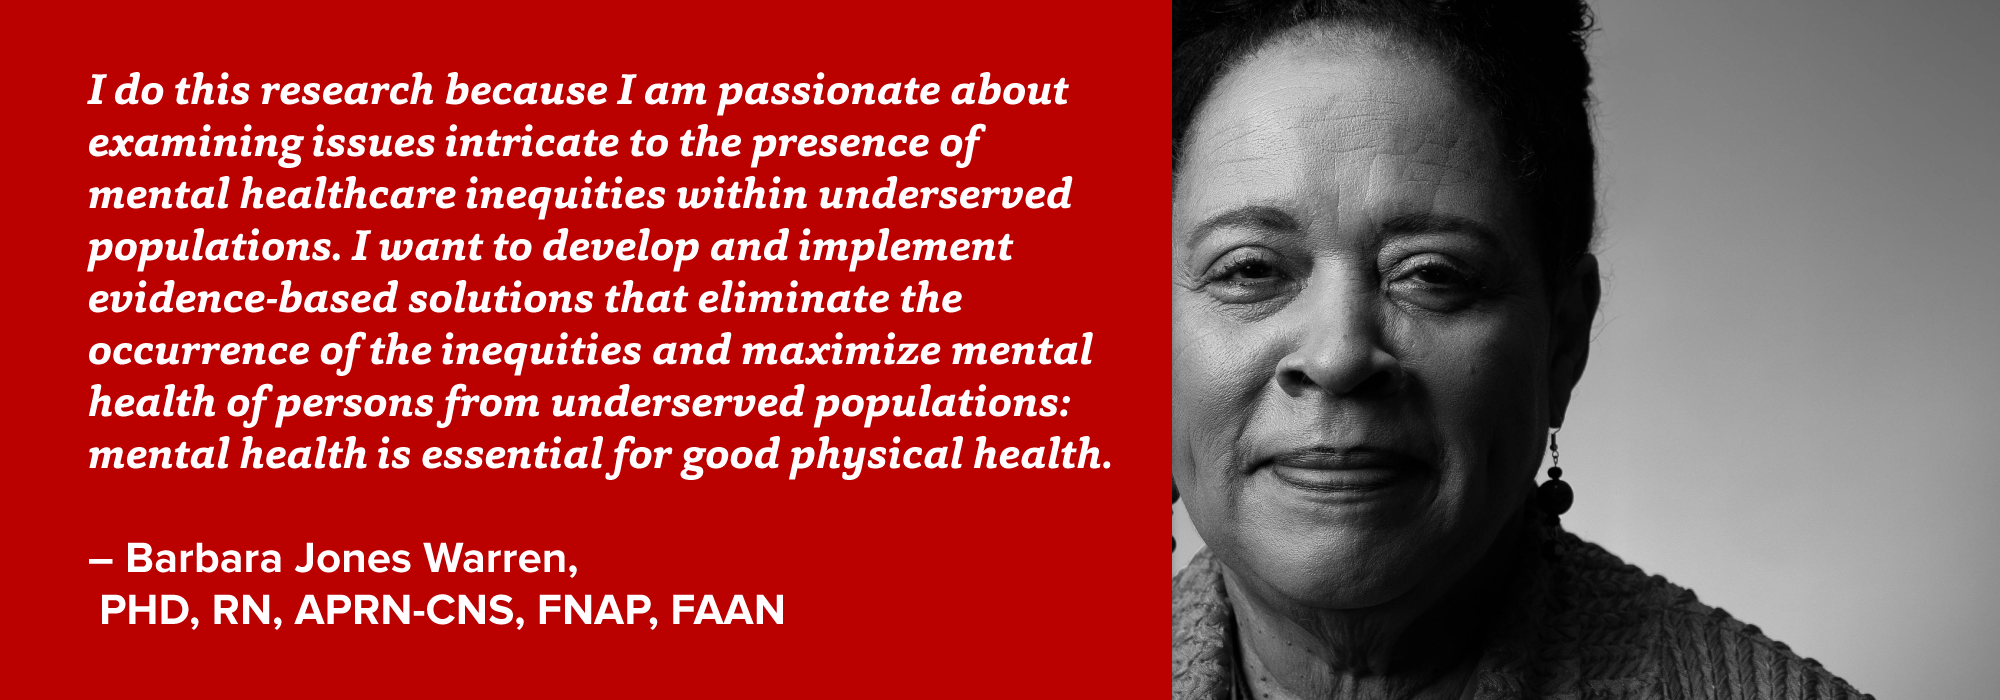 portrait of Barbara Warren with quote: I do this research because I am passionate about examining issues intricate to the presence of mental healthcare inequities within underserved populations. I want to develop and implement evidence-based solutions that eliminate the occurrence of the inequities and maximize mental health of persons from underserved populations: mental health is essential for good physical health.  – Barbara Jones Warren,  PHD, RN, APRN-CNS, FNAP, FAAN